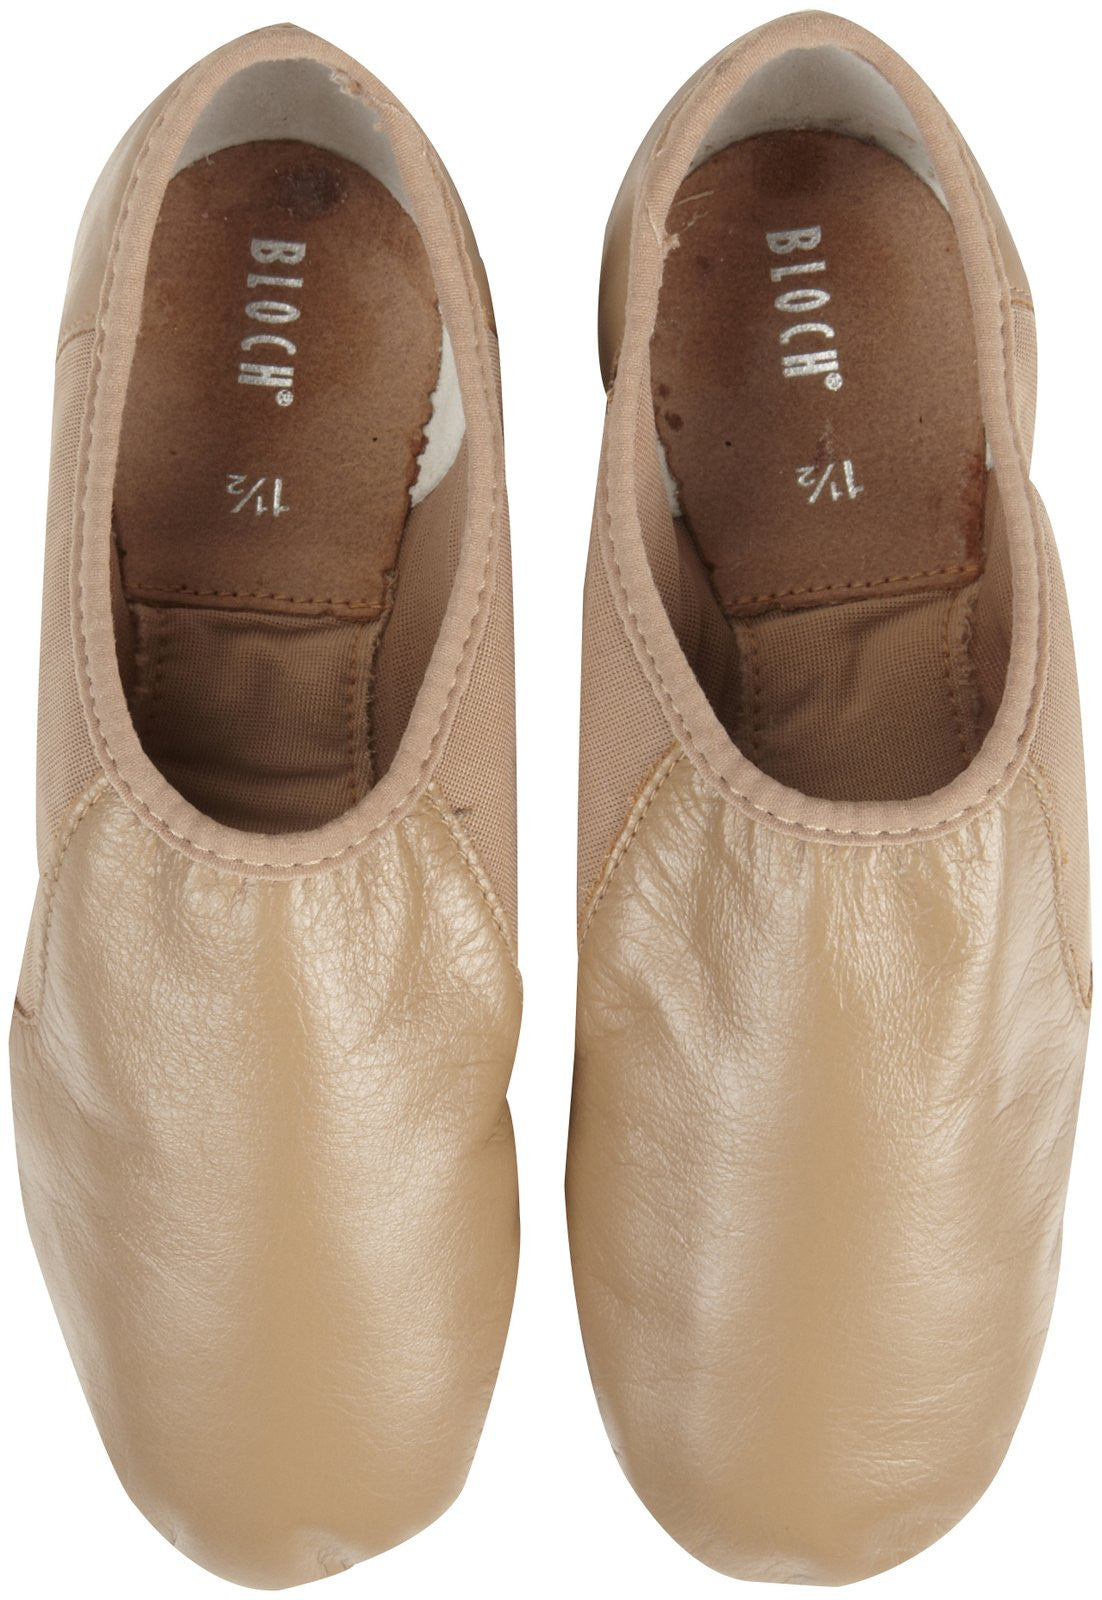 Bloch S0401 Girls and Ladies Super Jazz - bloch tan jazz shoes and black  jazz shoes.